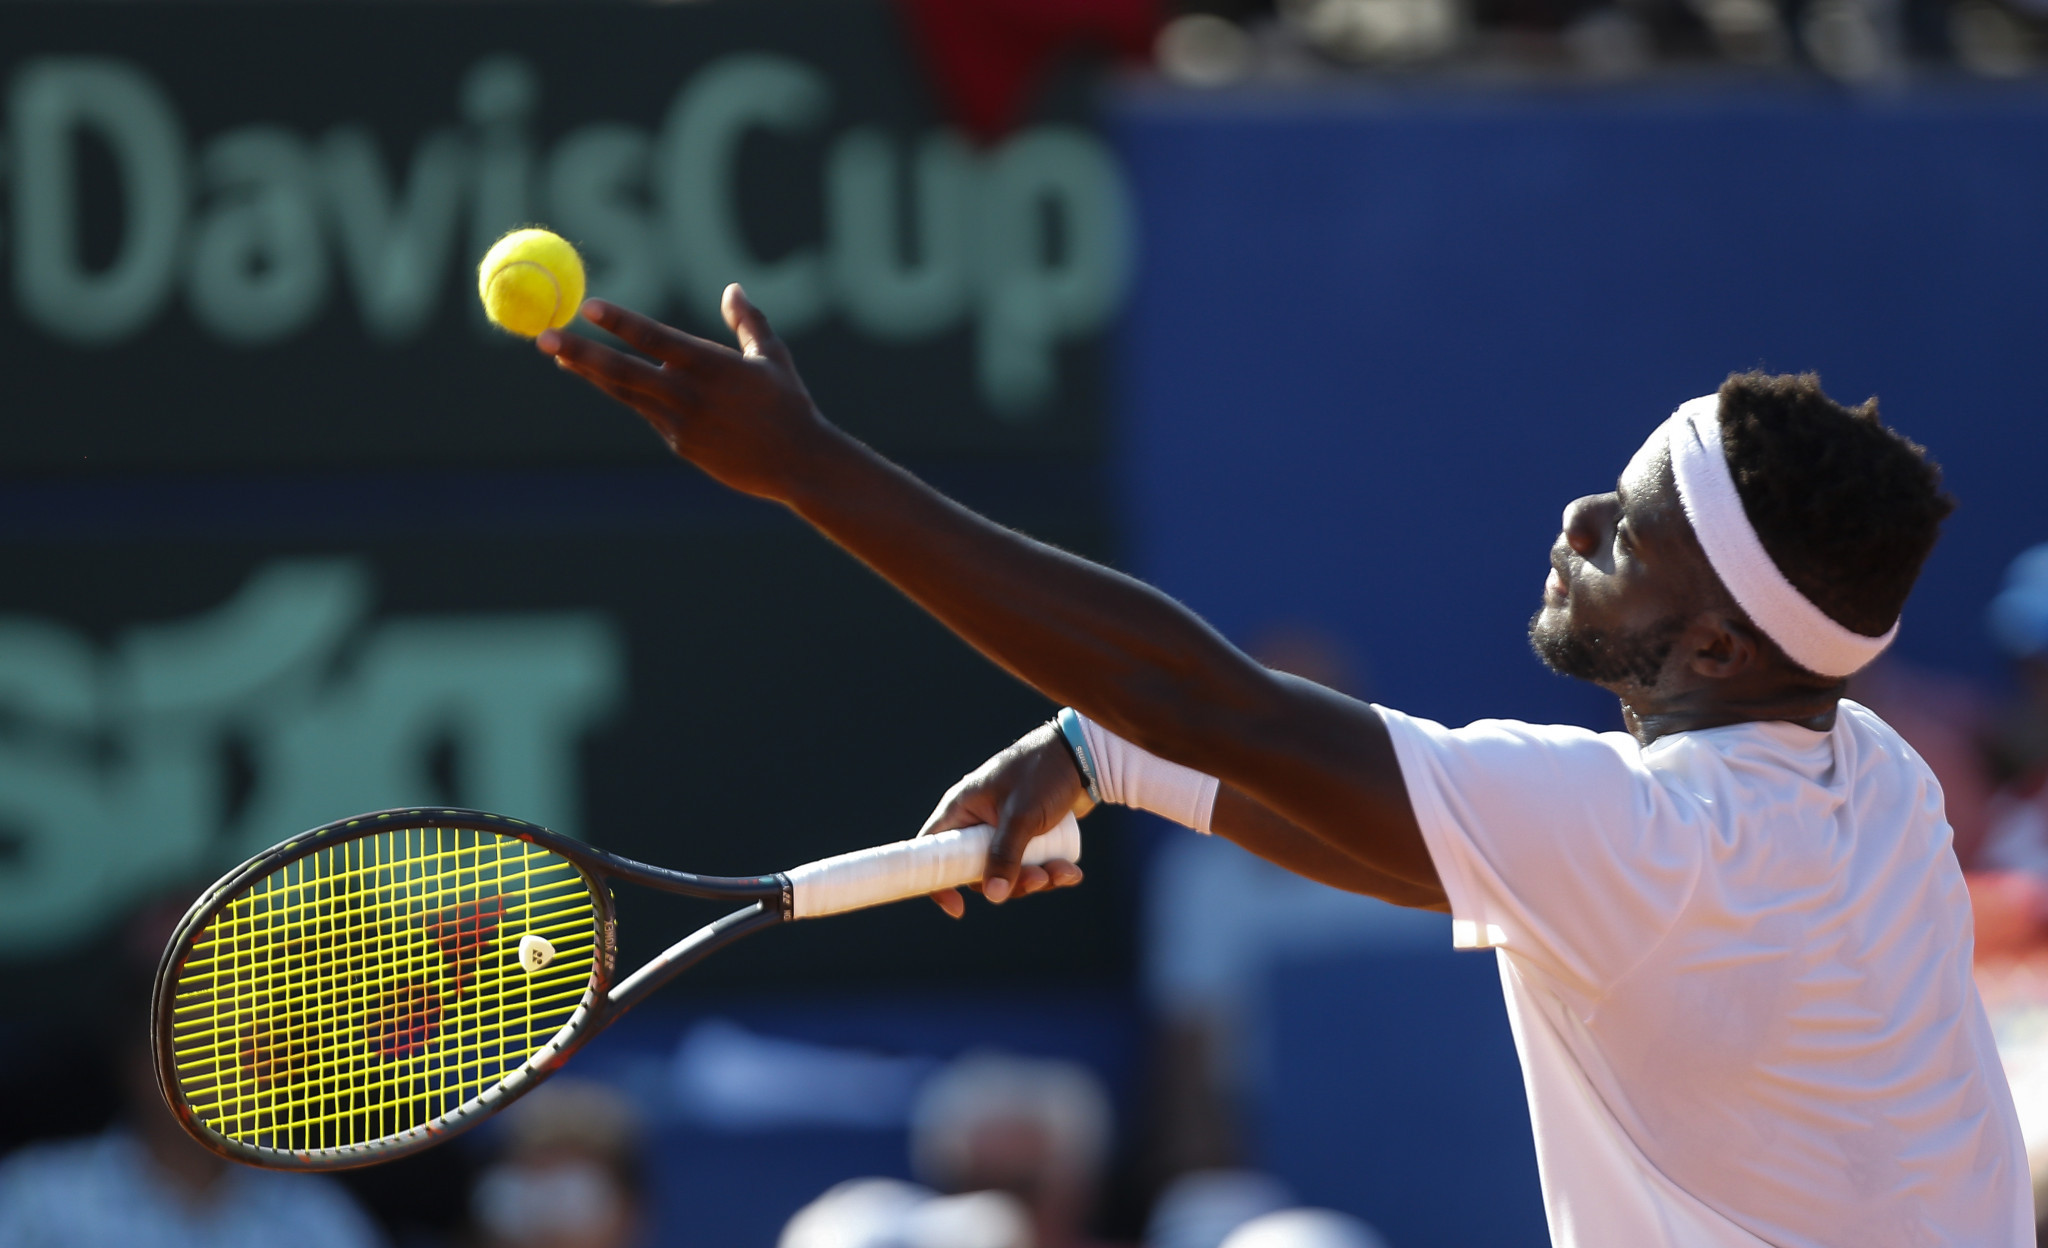 ITF introduce global format for Davis Cup regional groups